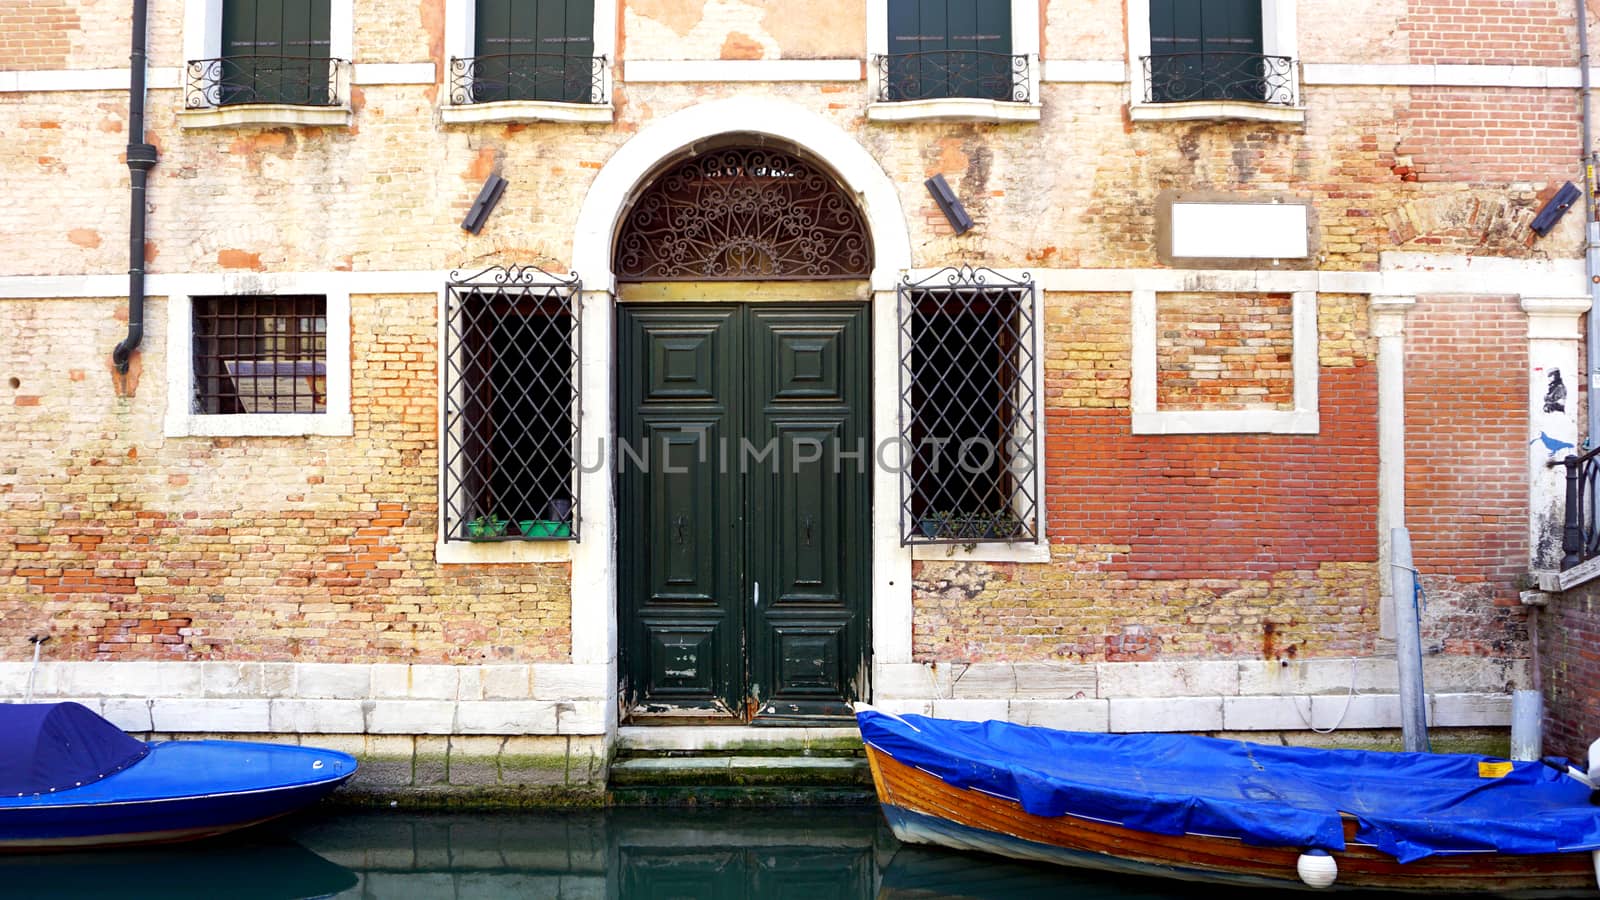 canal and boats with ancient brick wall house elements in Venice, Italy